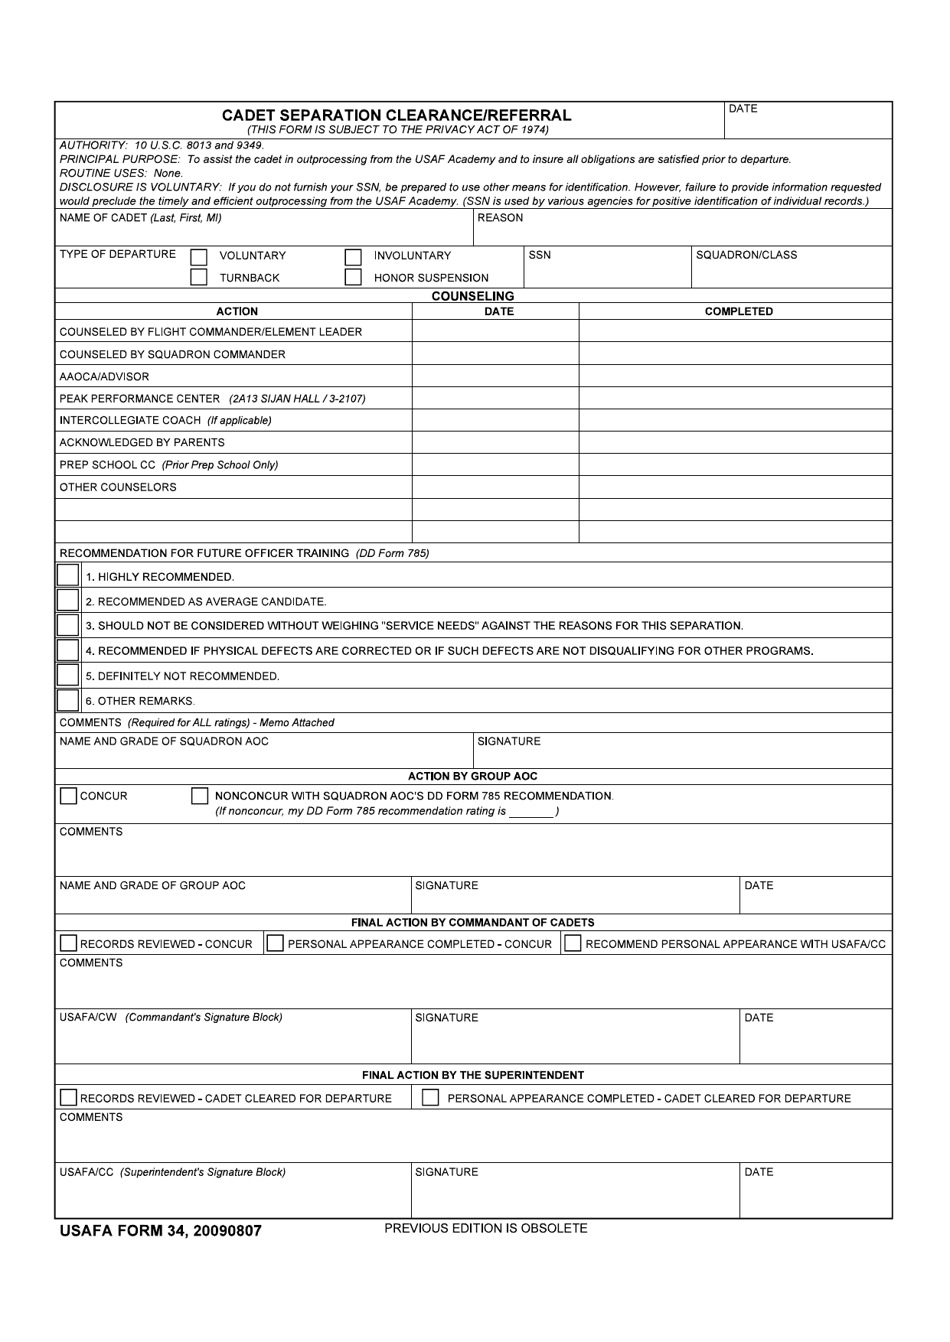 USAFA Form 34 Cadet Separation Clearance / Referral, Page 1